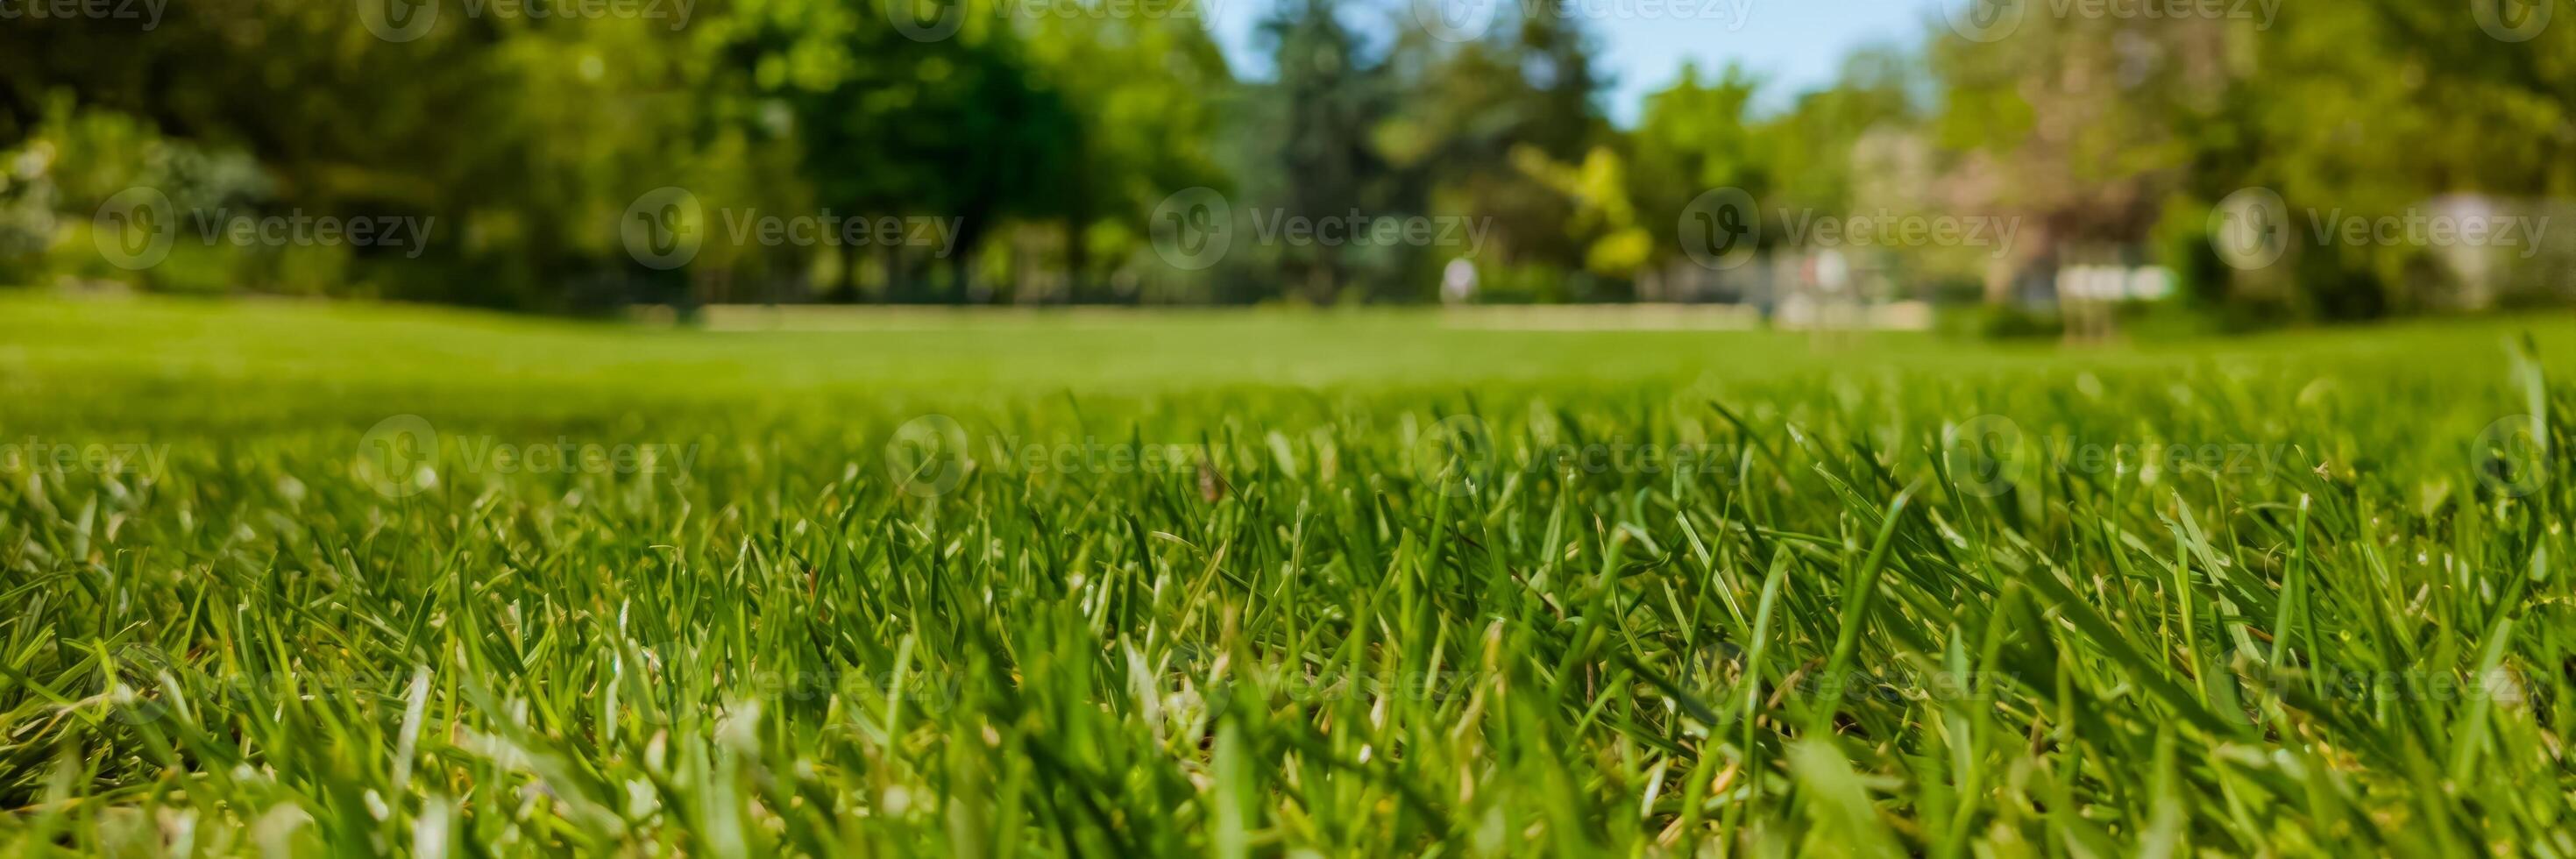 Low angle view of vibrant green grass in a park capturing the essence of spring and Earth Day celebrations, ideal for environmental themes photo